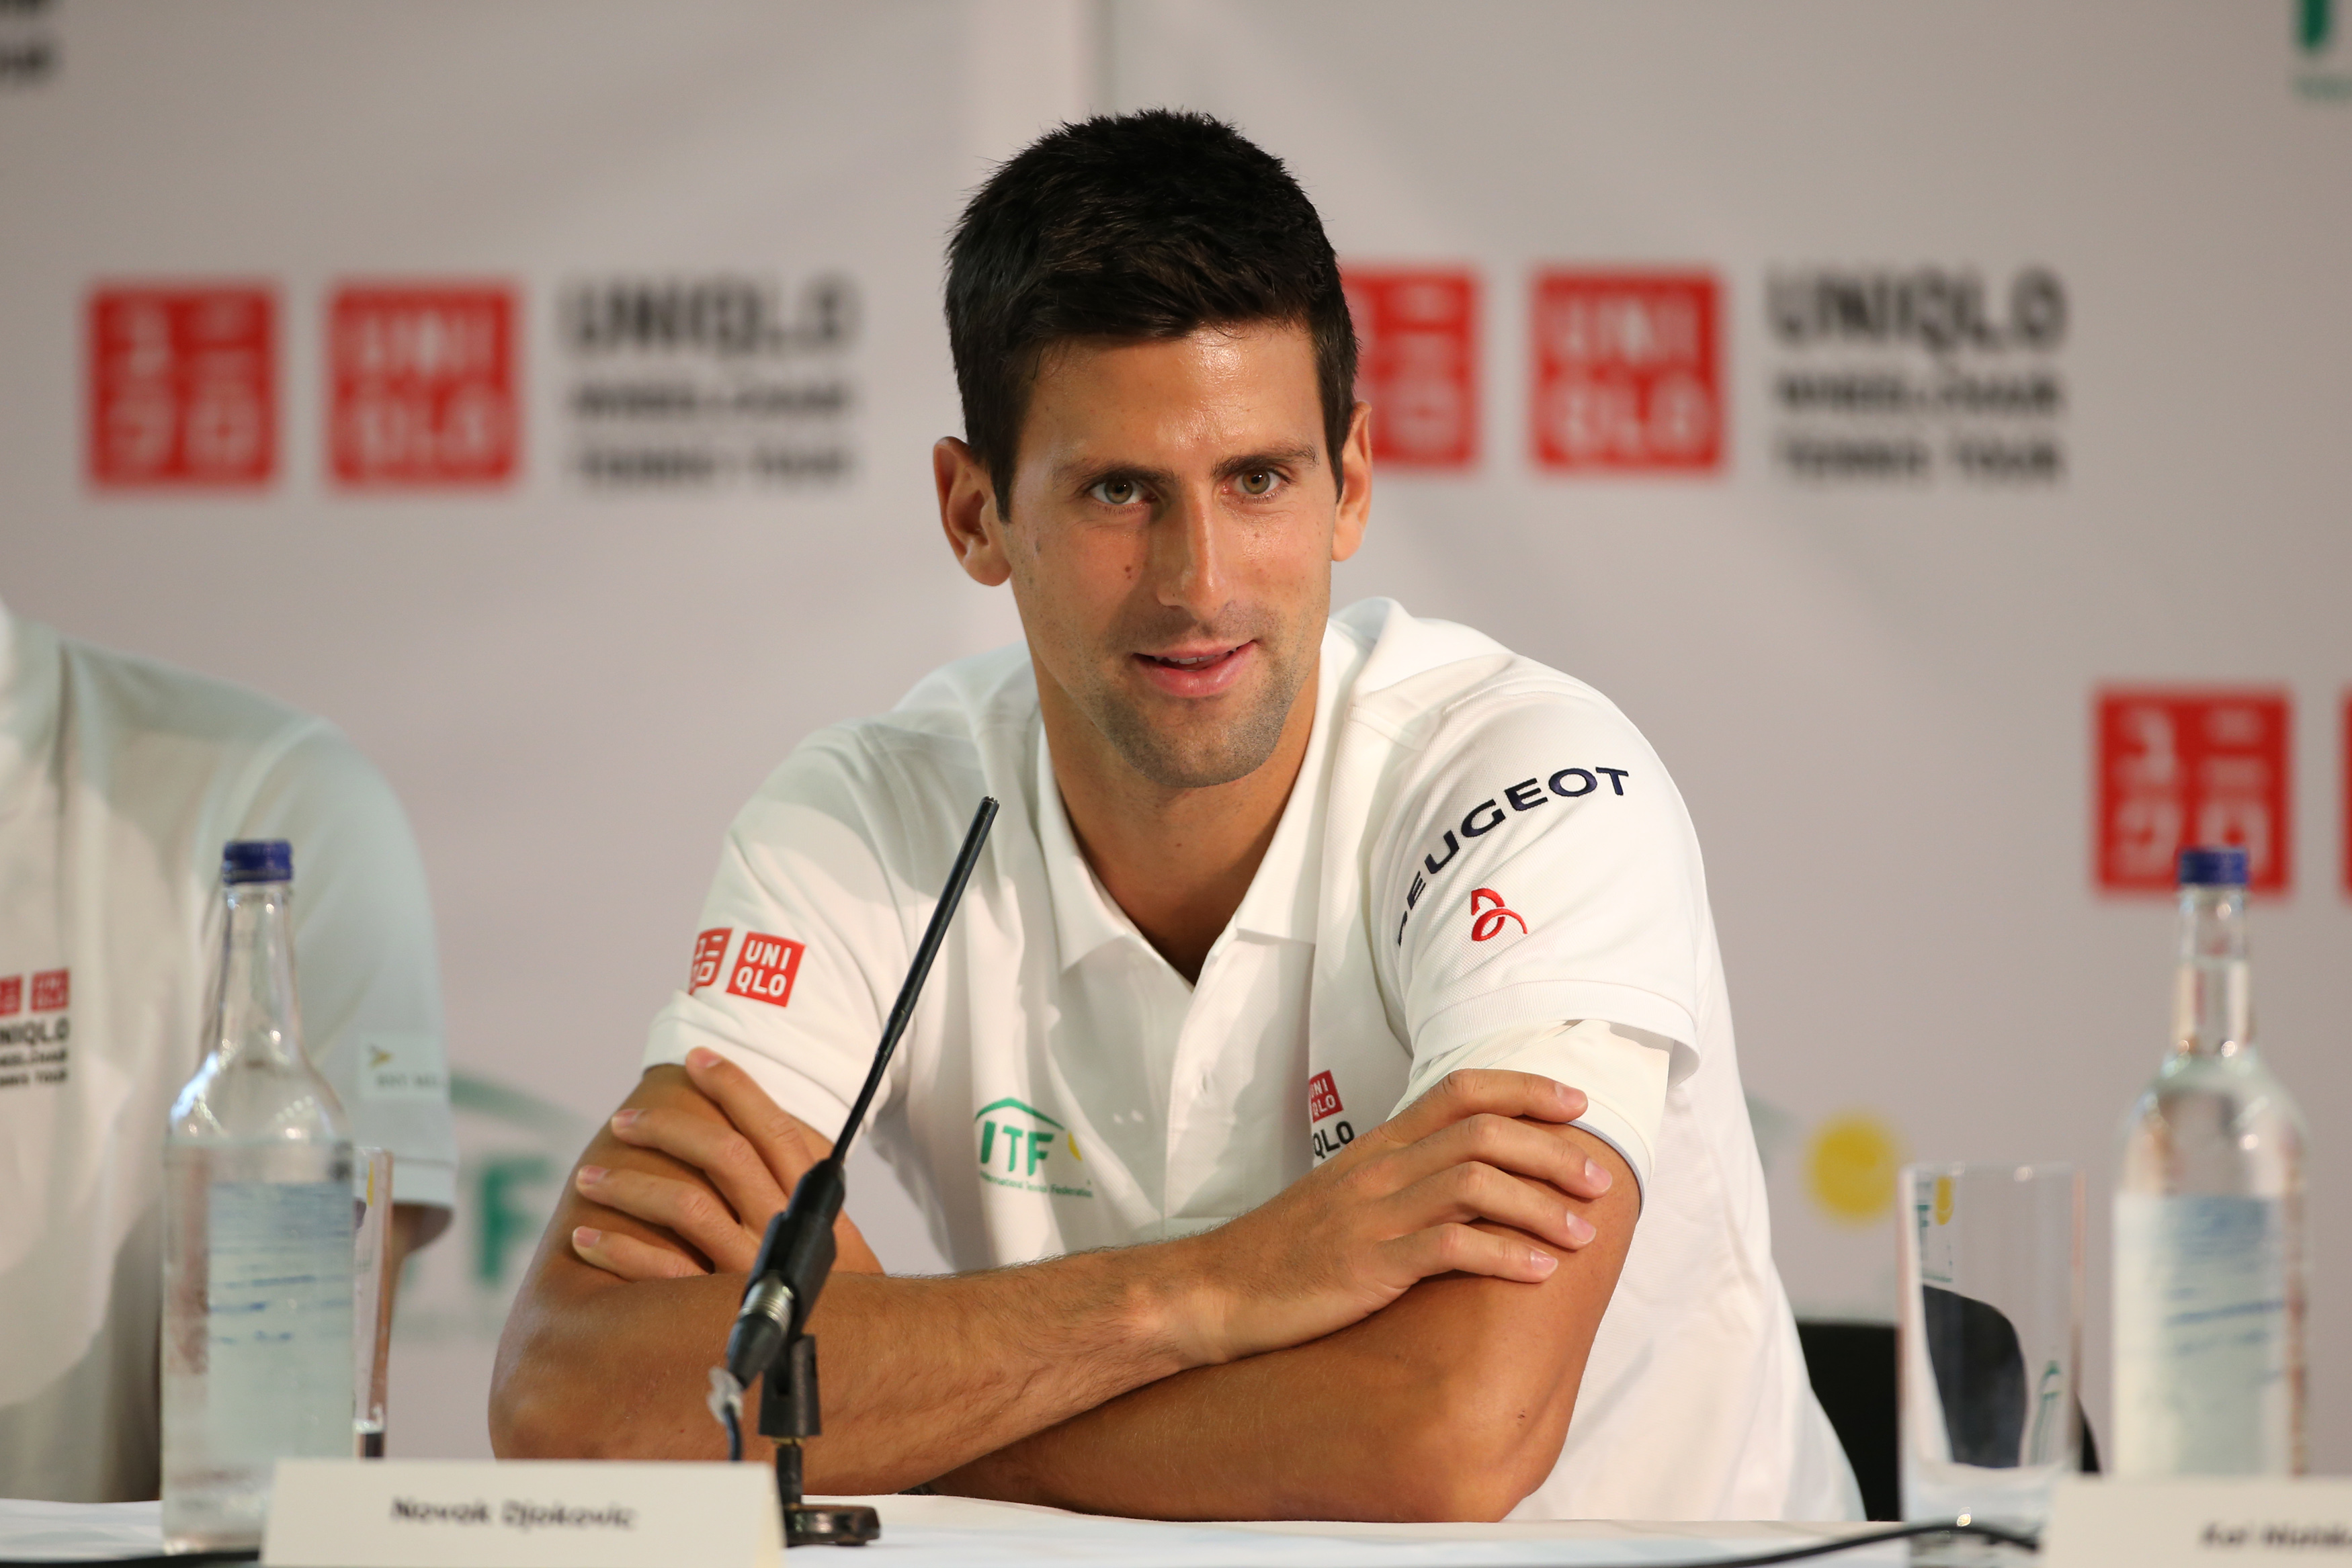 Novak Djokovic Endorsements 5 Fast Facts You Need to Know